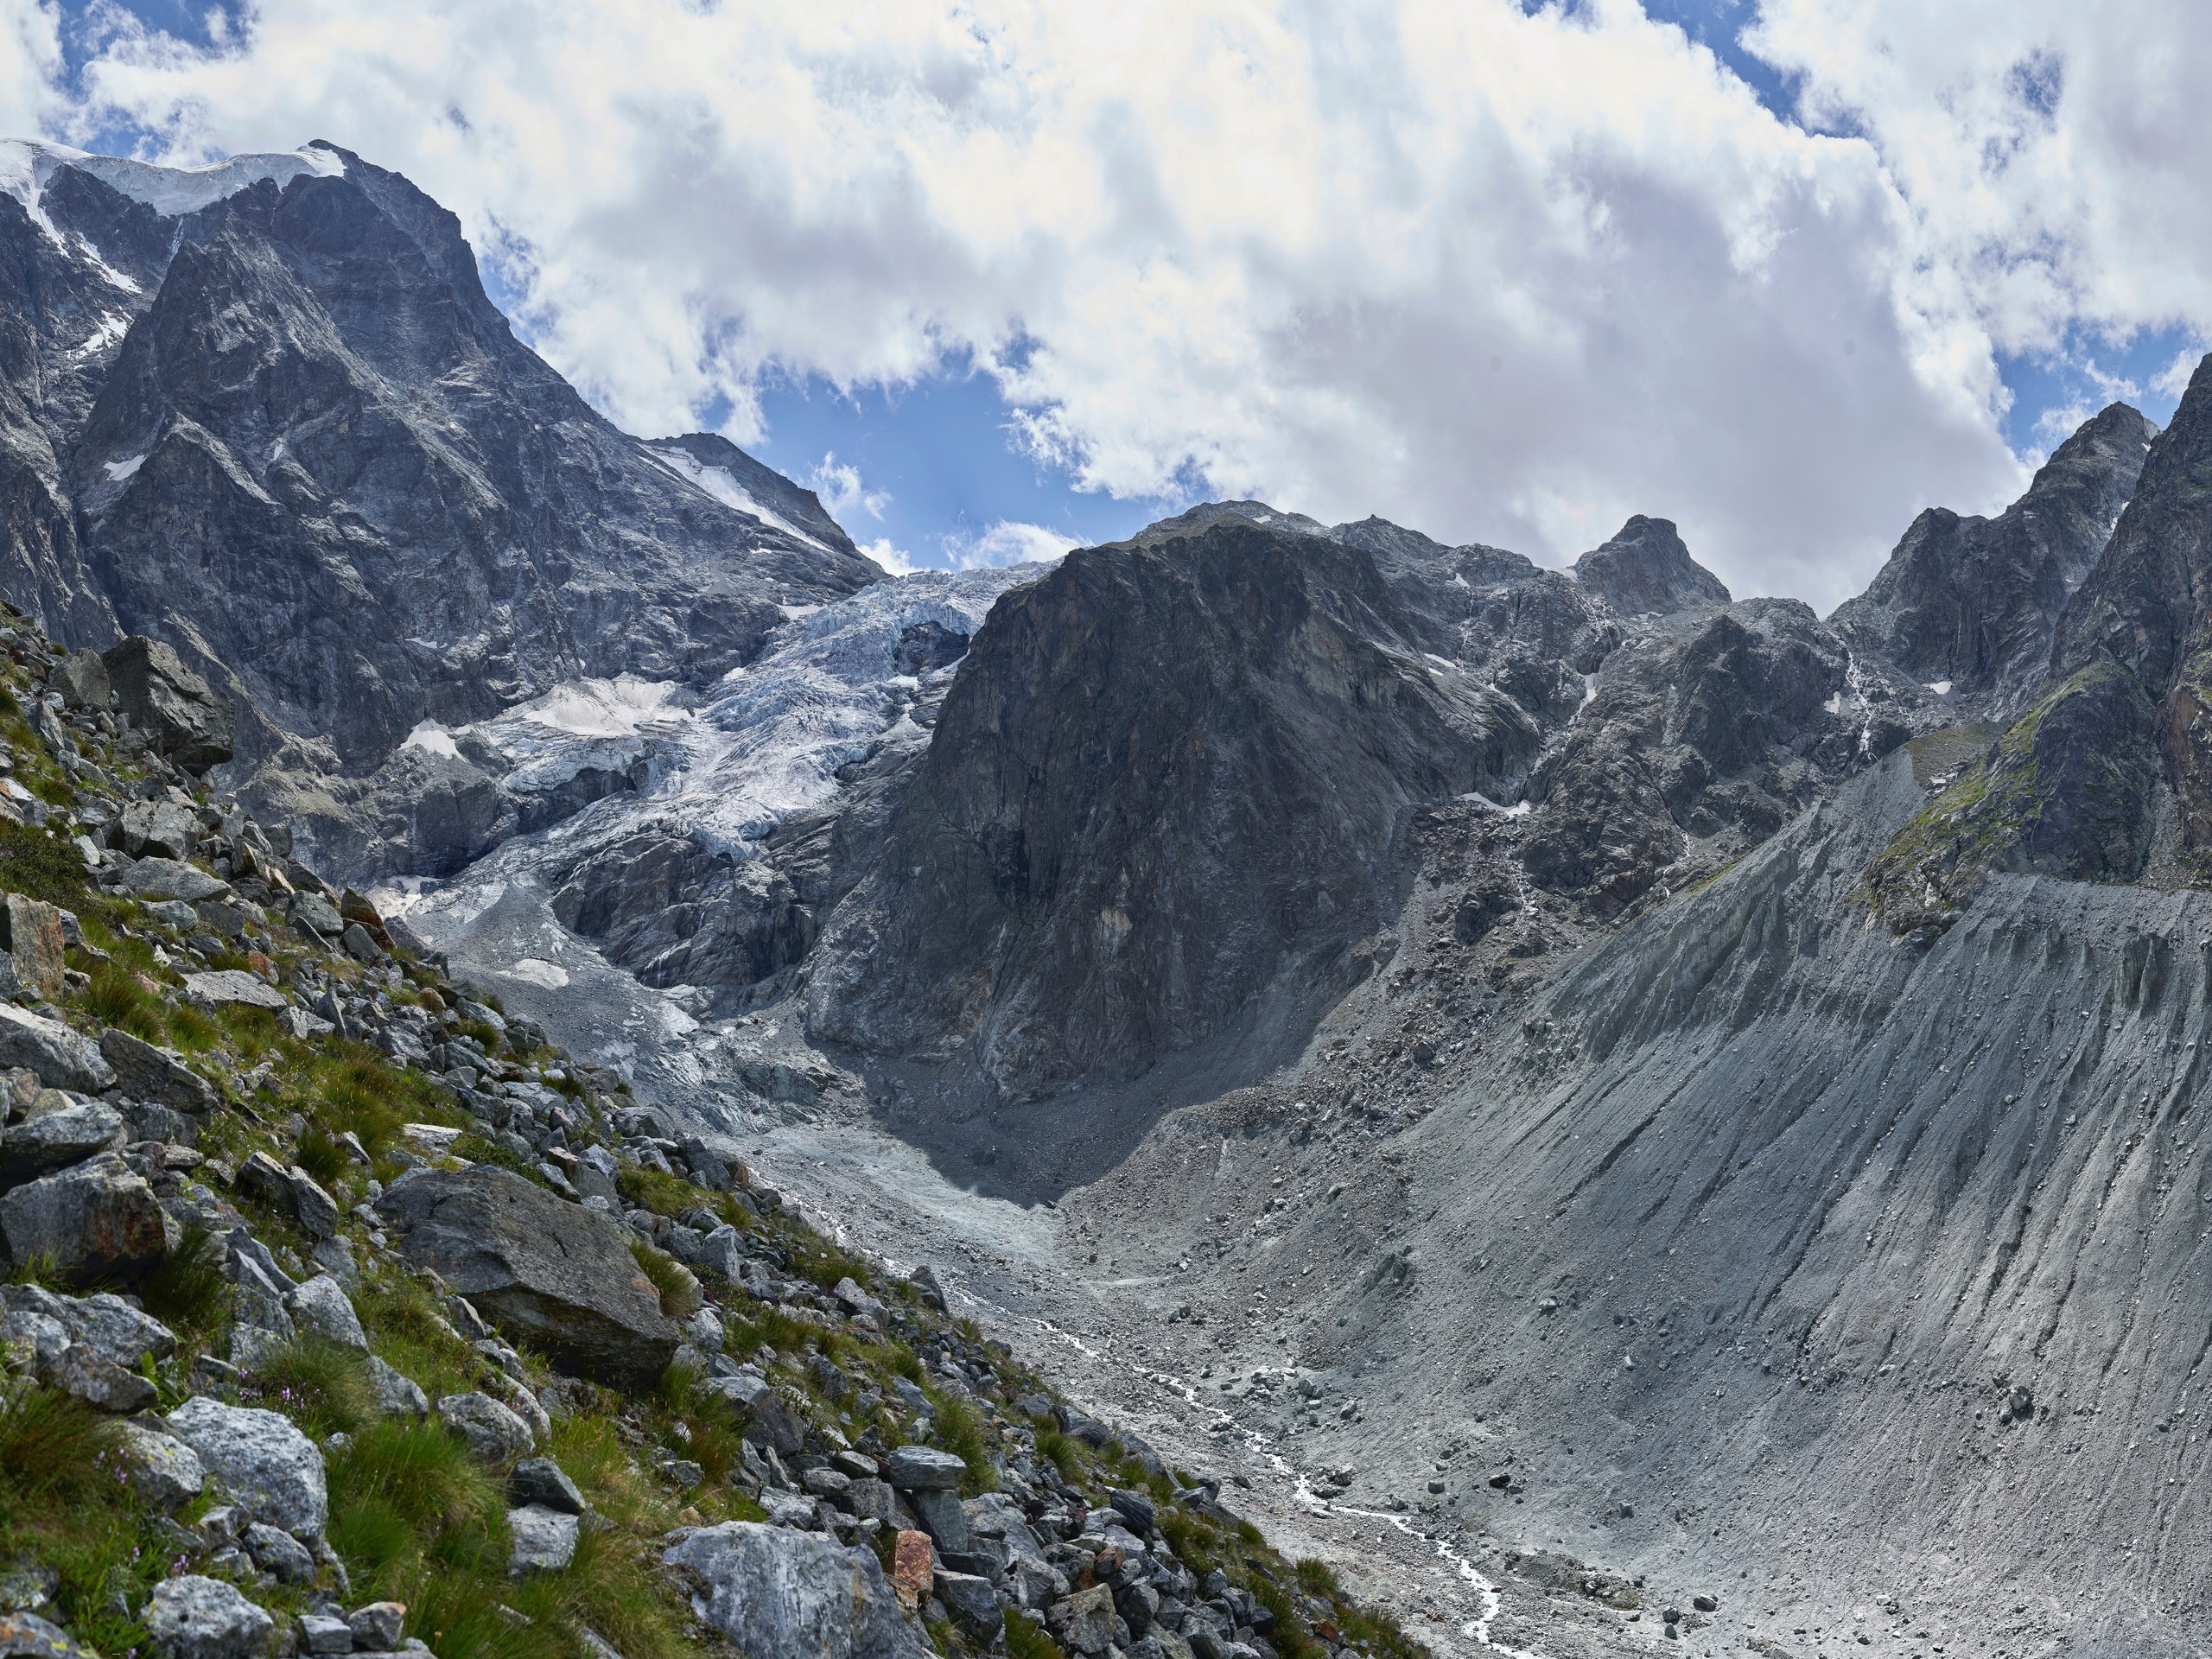 Stunning Arolla Glacier as seen from the above